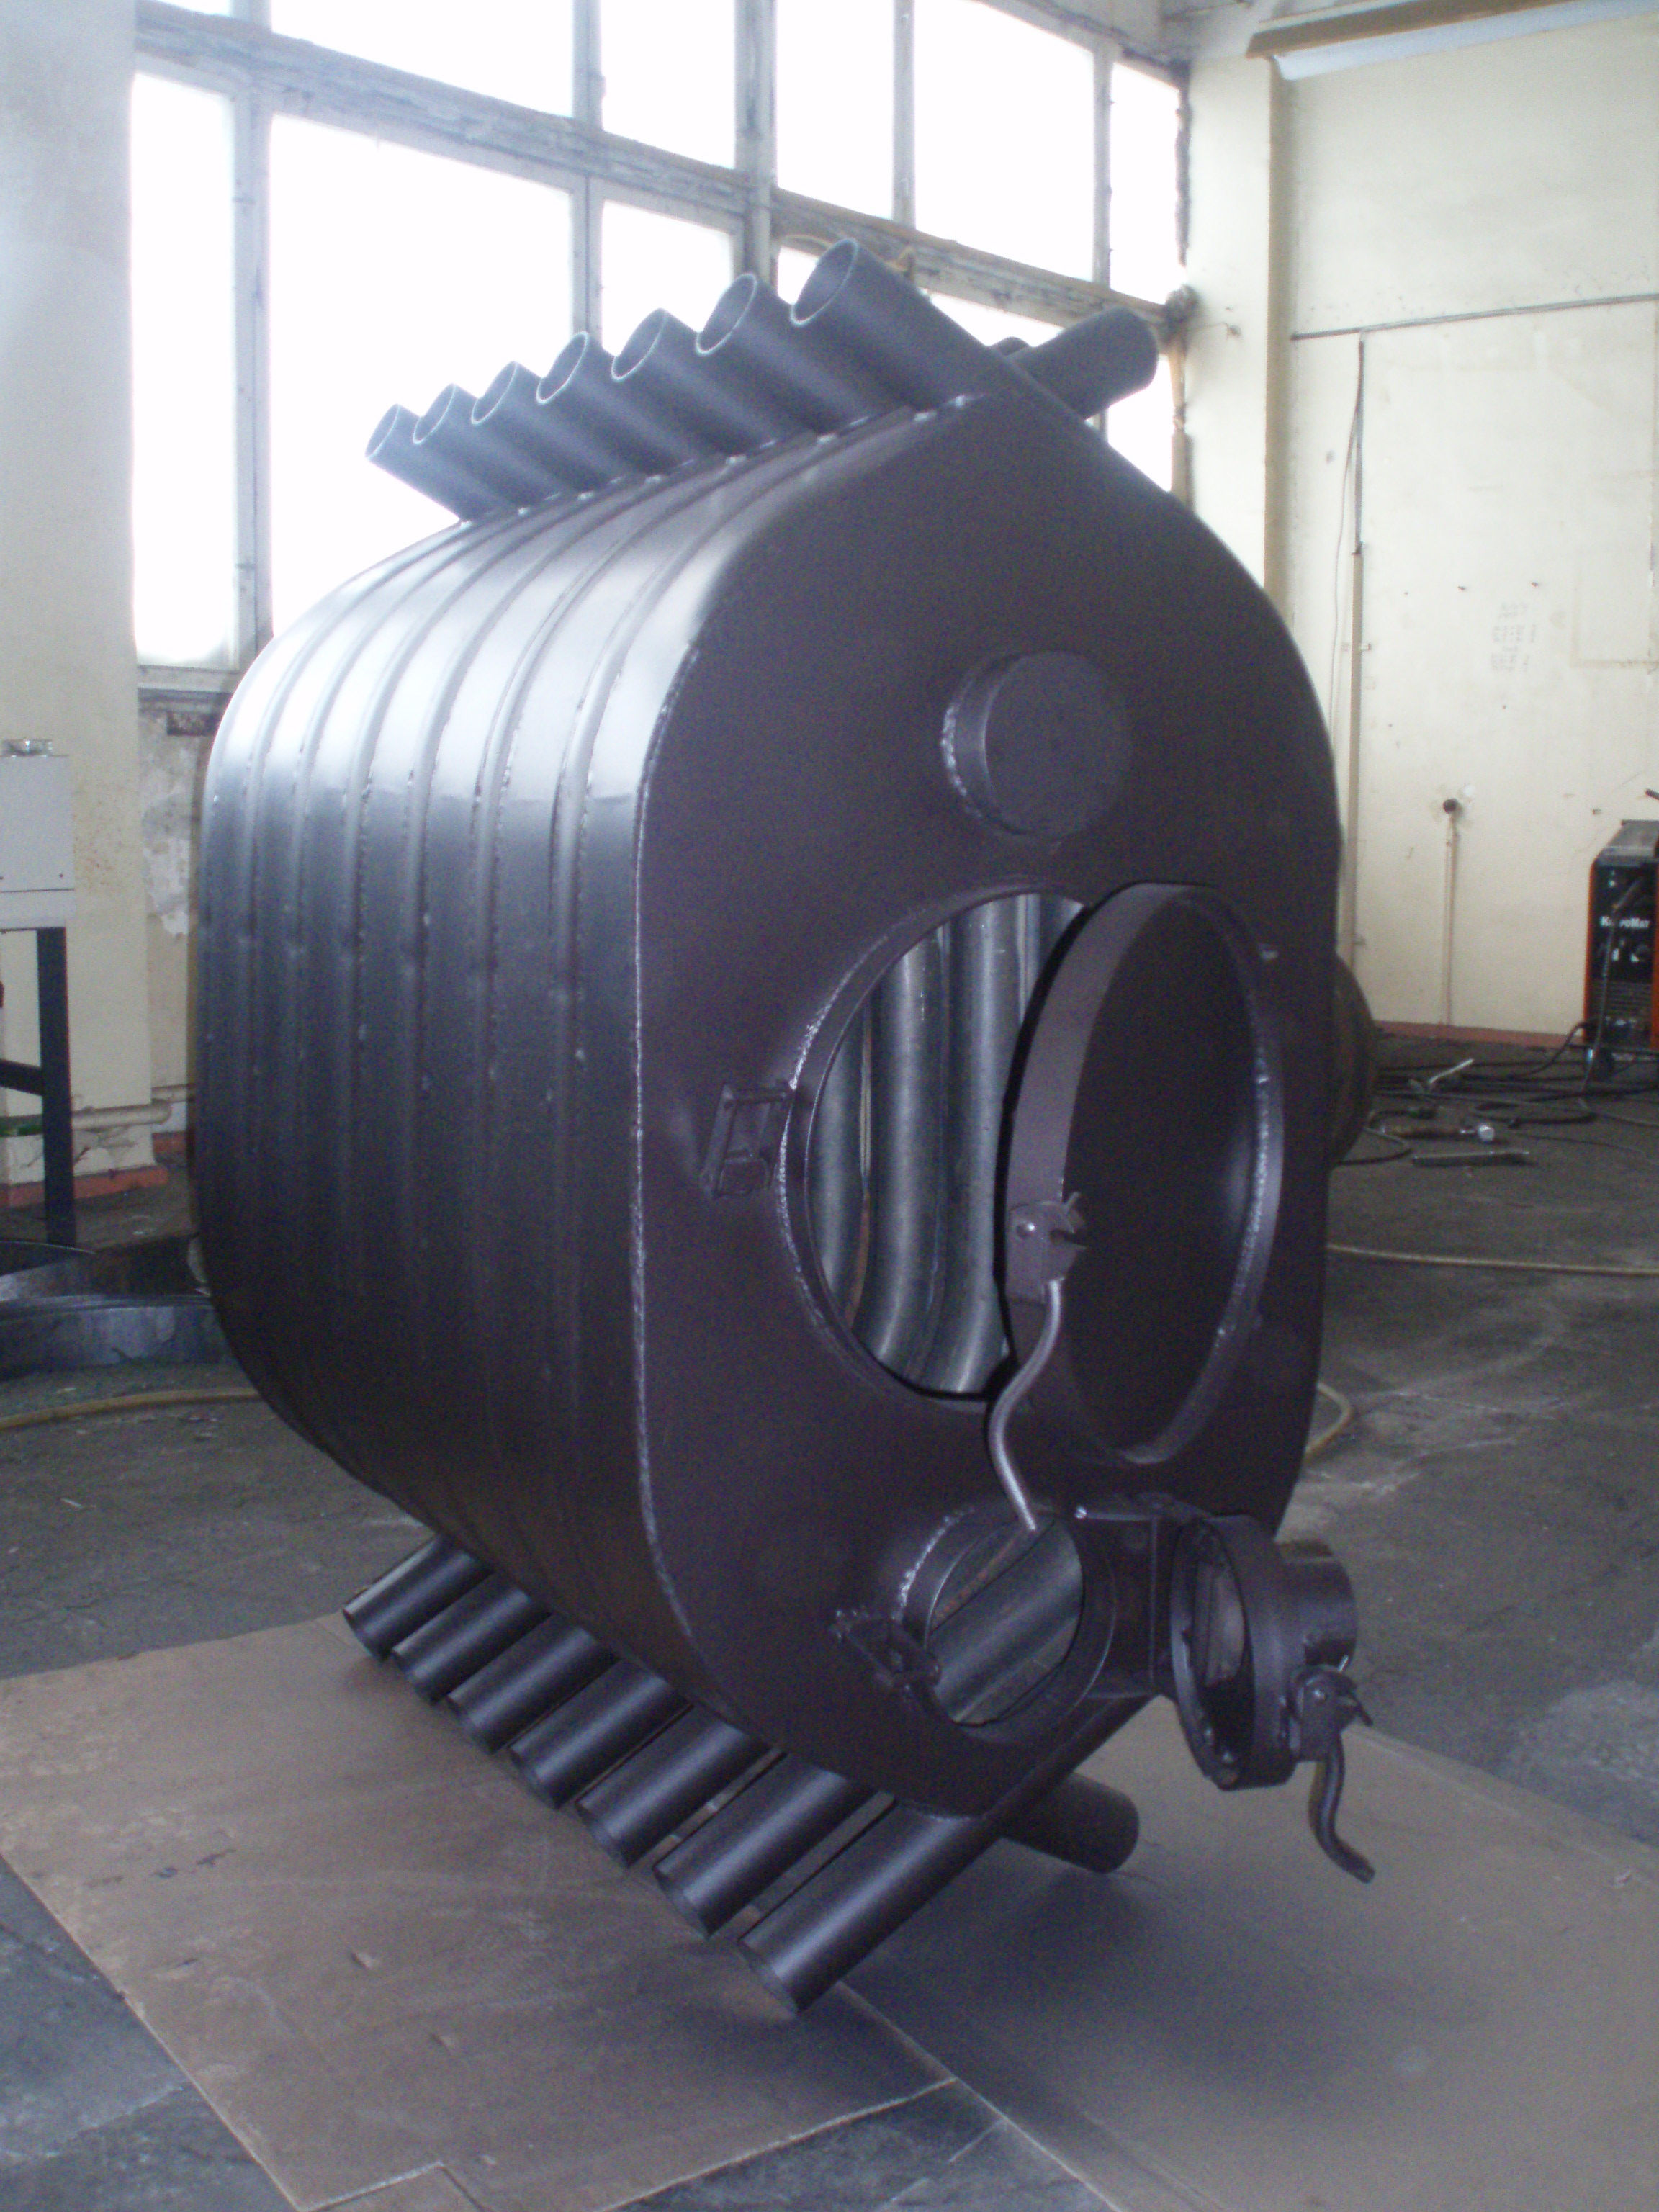 Bulder fireplace, type 05 (14 pipes), 60 kW, 2000 m3